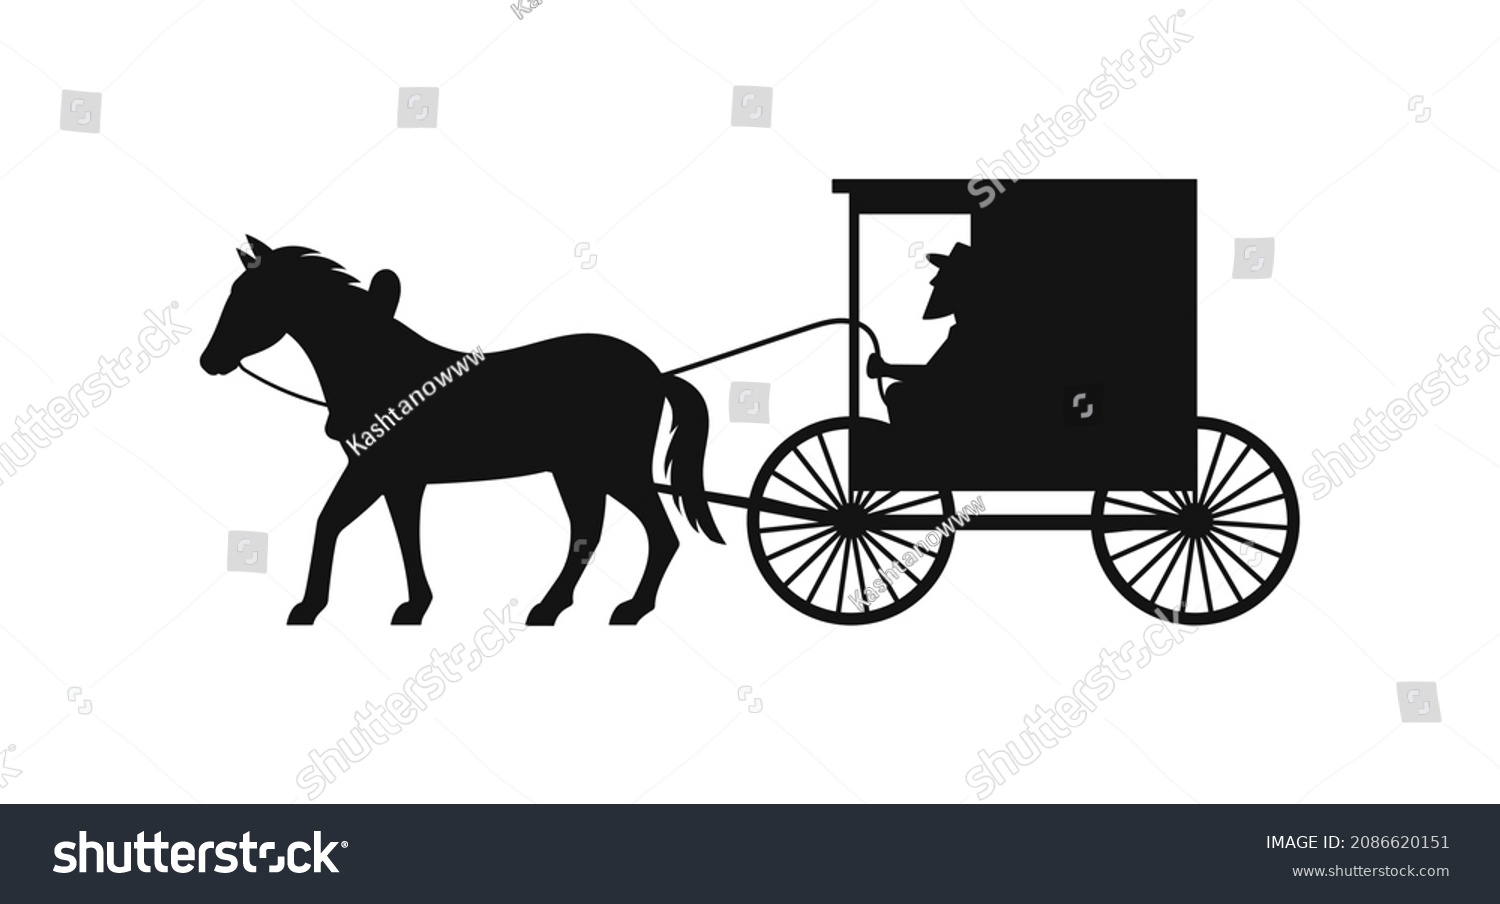 SVG of Amish or mennonite buggy black silhouette logo isolated on white. Chariot wiht horse and bearded man. Symbol vintage design. Vector illustration. svg